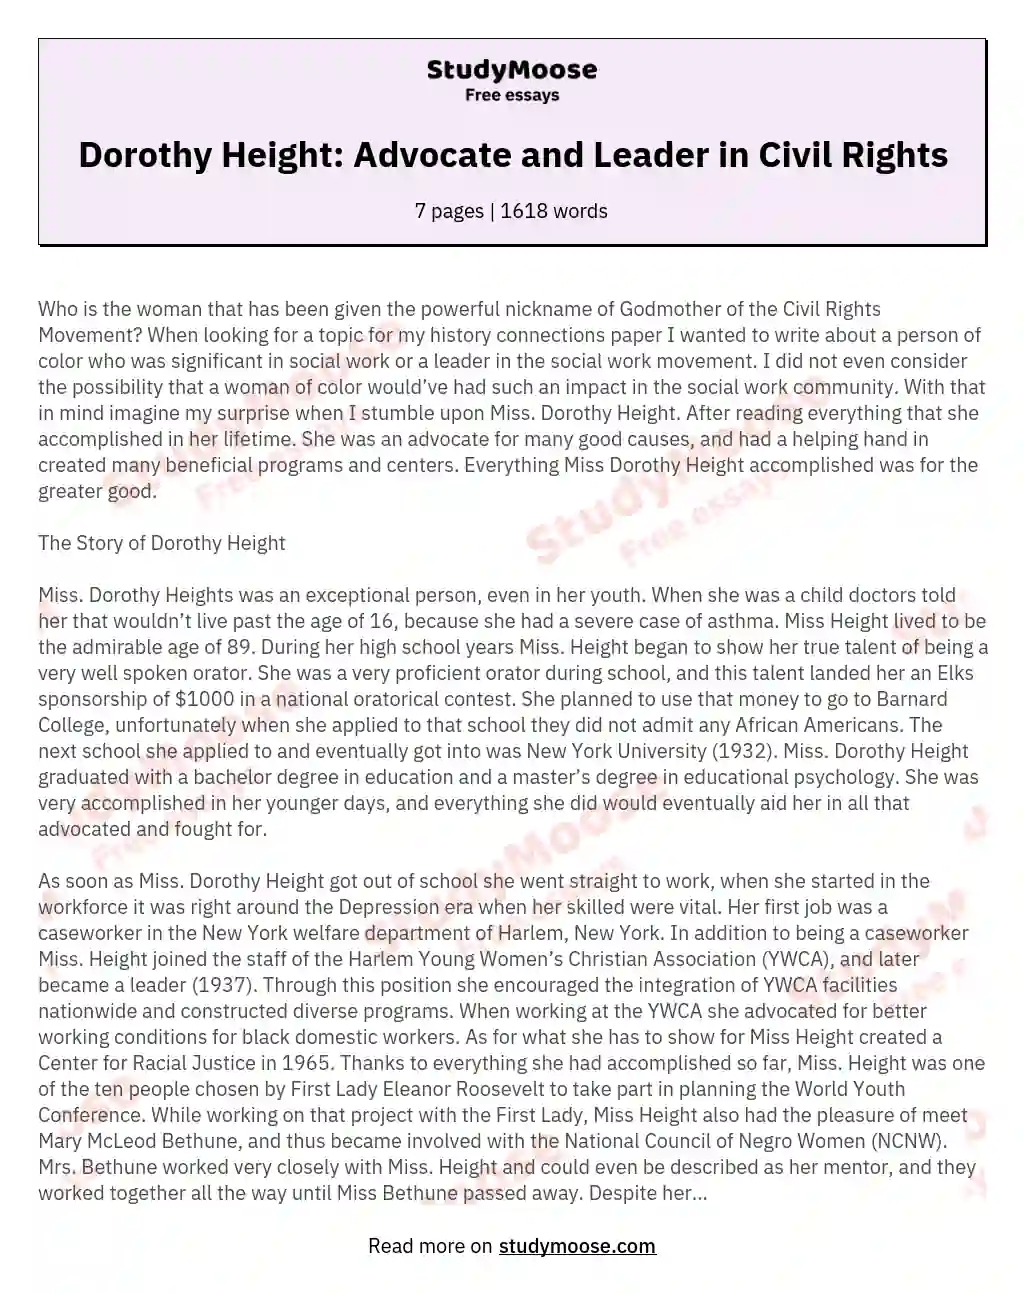 Dorothy Height: Advocate and Leader in Civil Rights essay